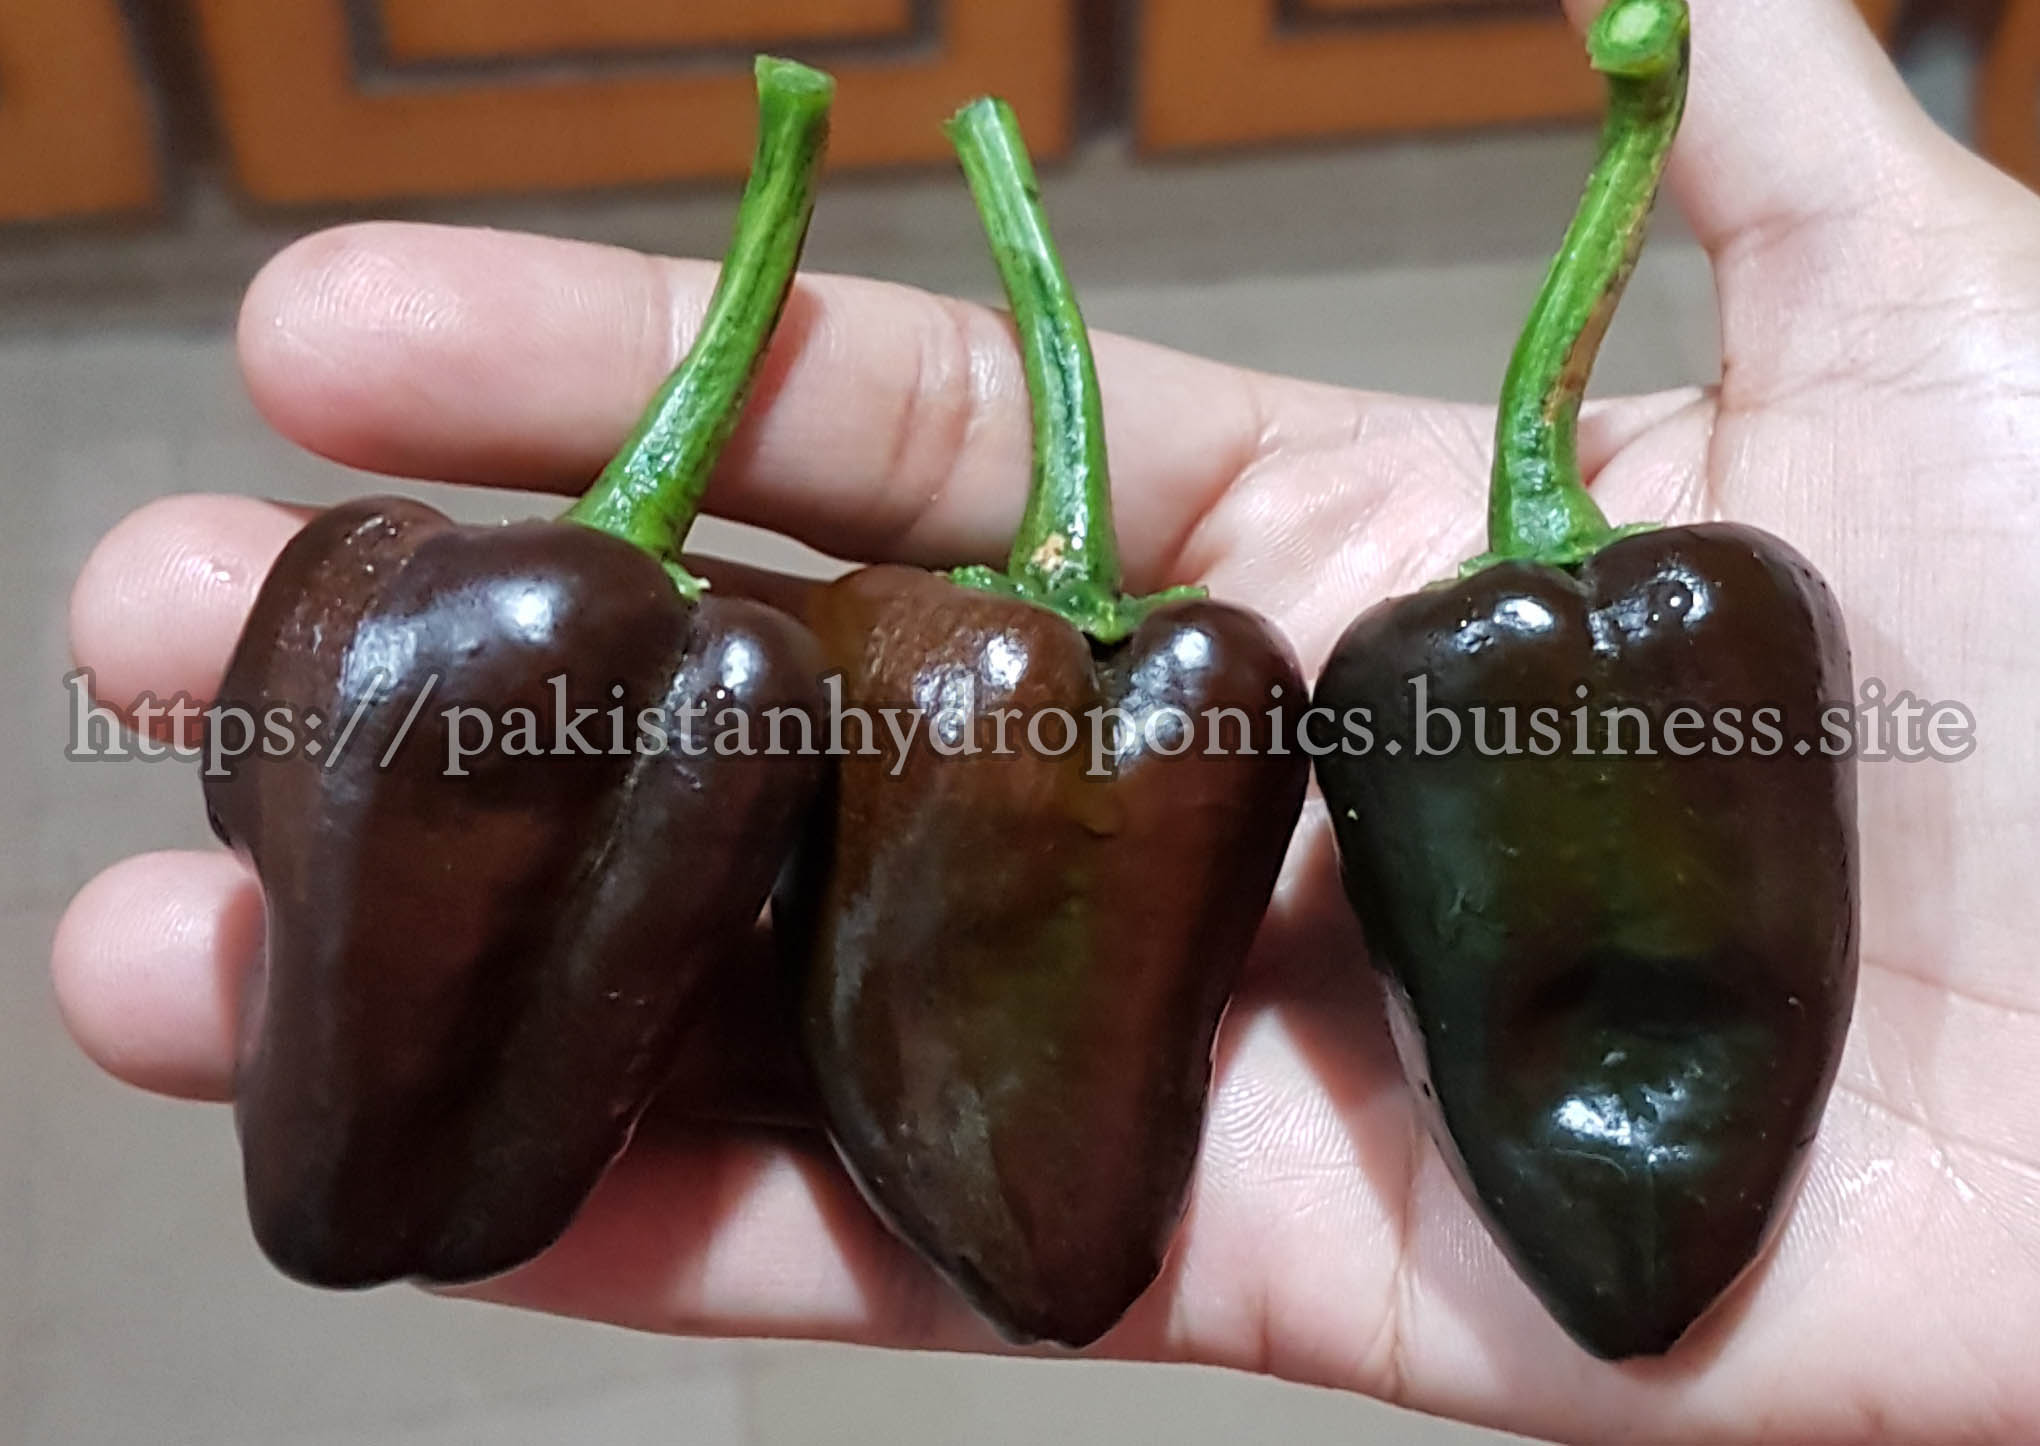 1_Hydroponic-Sweet-Brown-Peppers-Growing-in-Pakistan-Hydroponics-Greenhouse-Porject